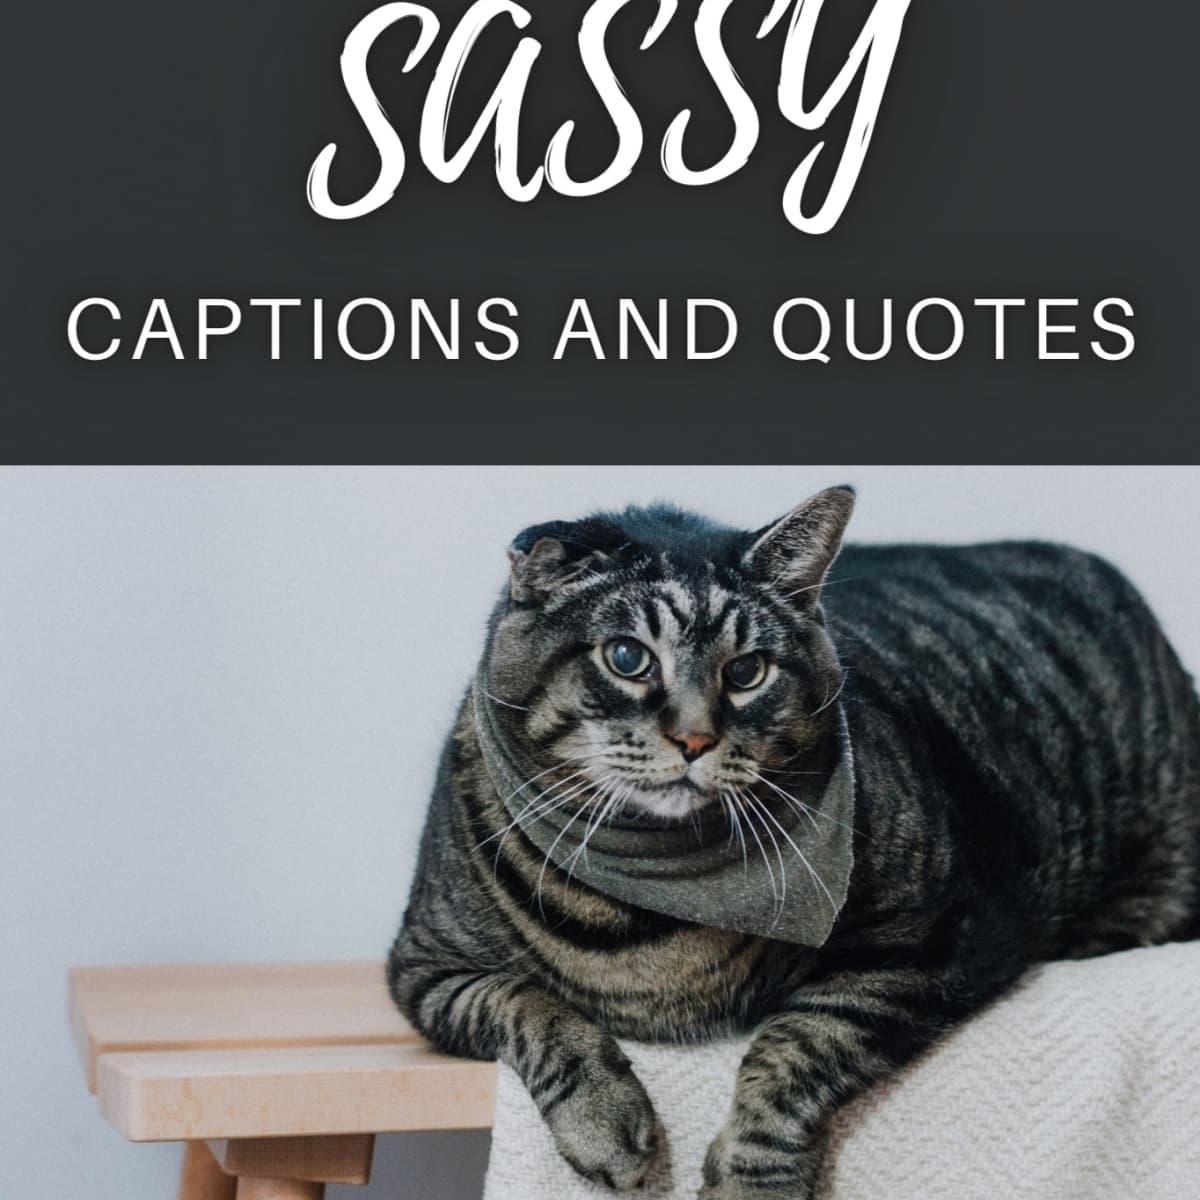 250+ Sassy Quotes and Caption Ideas for Instagram - TurboFuture